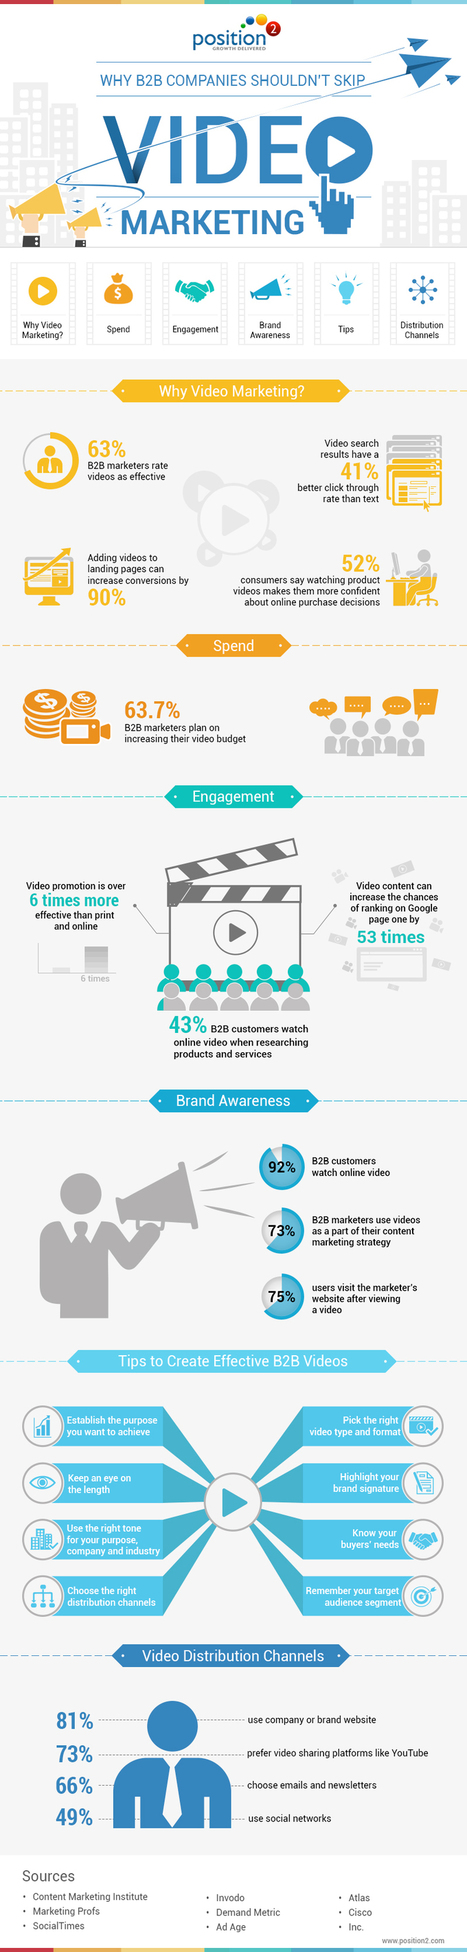 Why B2B companies shouldn't skip Video Marketing-Infographic | E-Learning-Inclusivo (Mashup) | Scoop.it